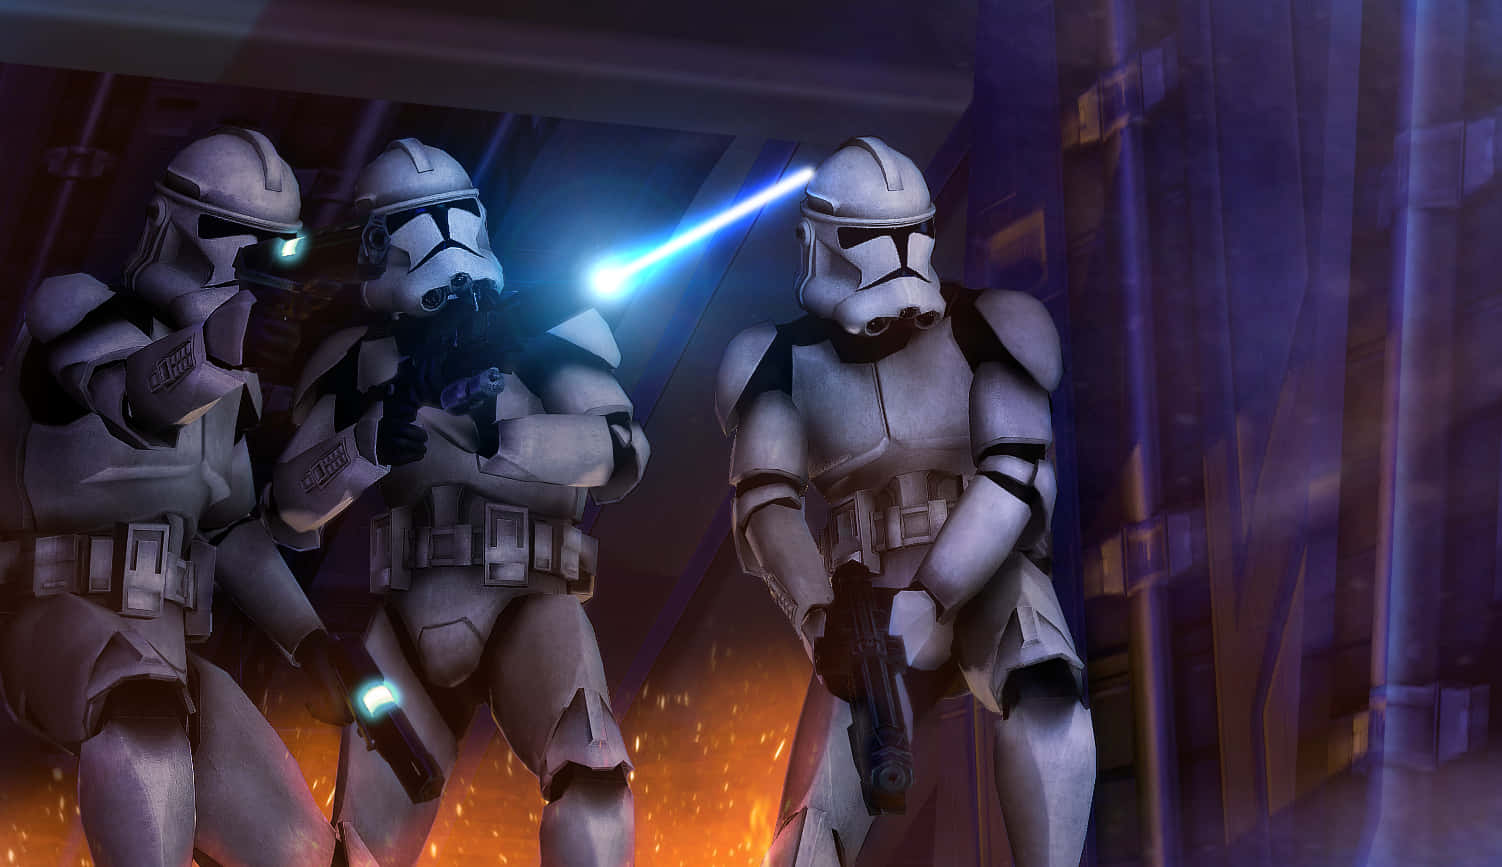 Jedi Knights defend the Republic against the Separatists in the Clone Wars. Wallpaper